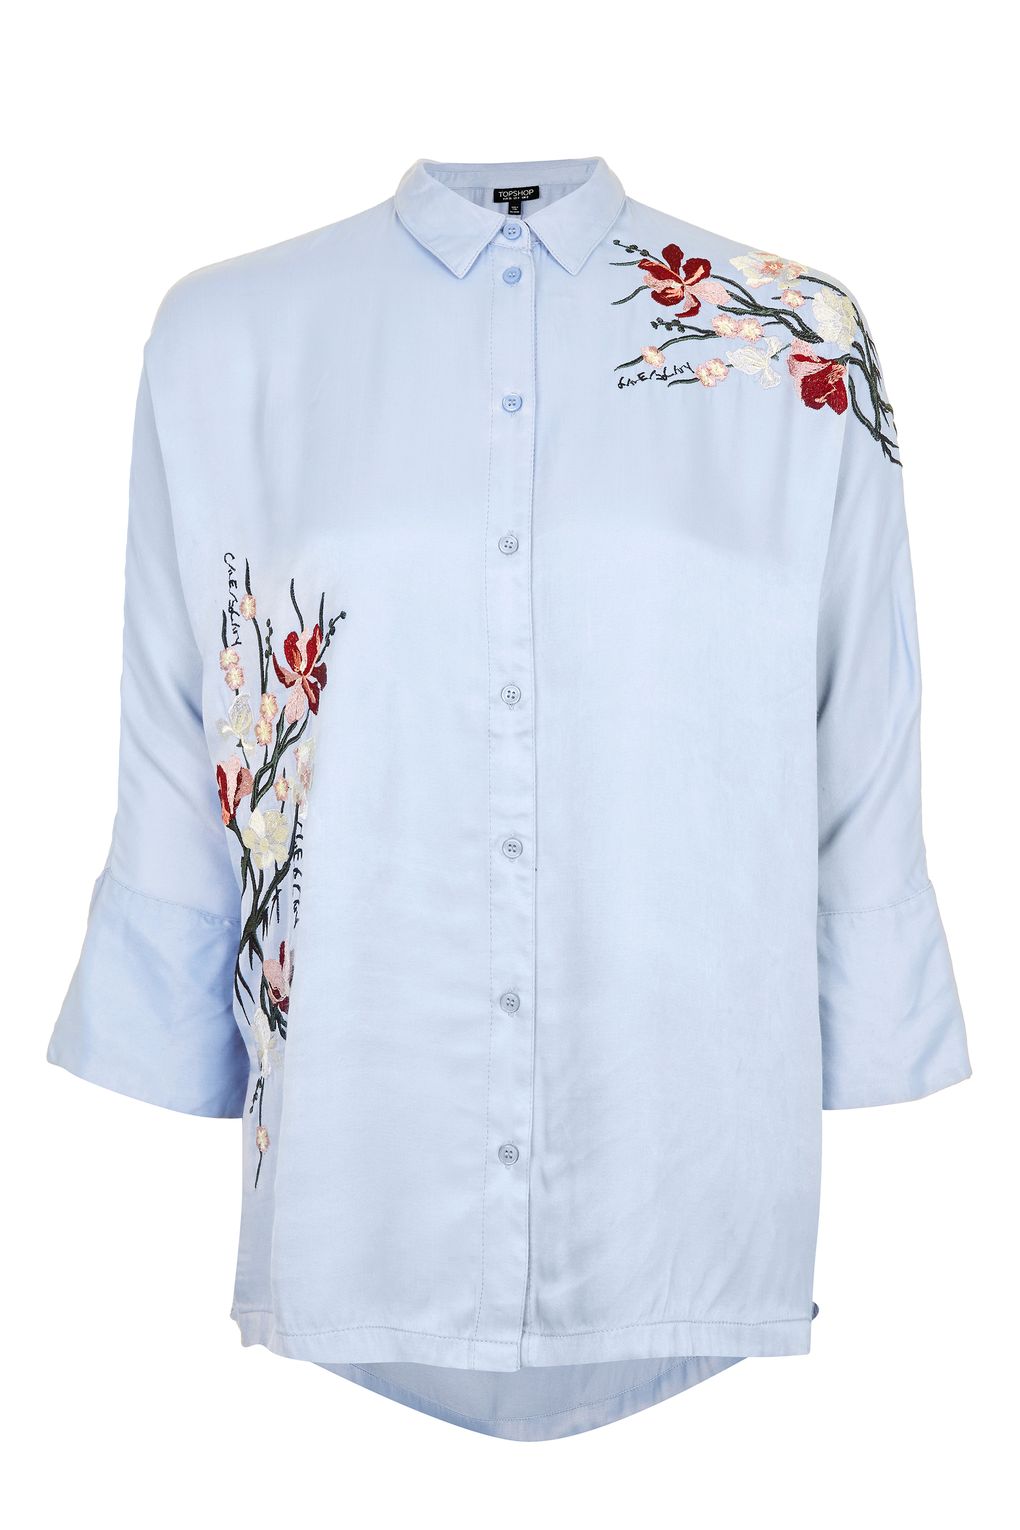 embroidered shirts tokyo fusion embroidered shirt - the wide leg crops - we love - topshop usa IZAPOXW